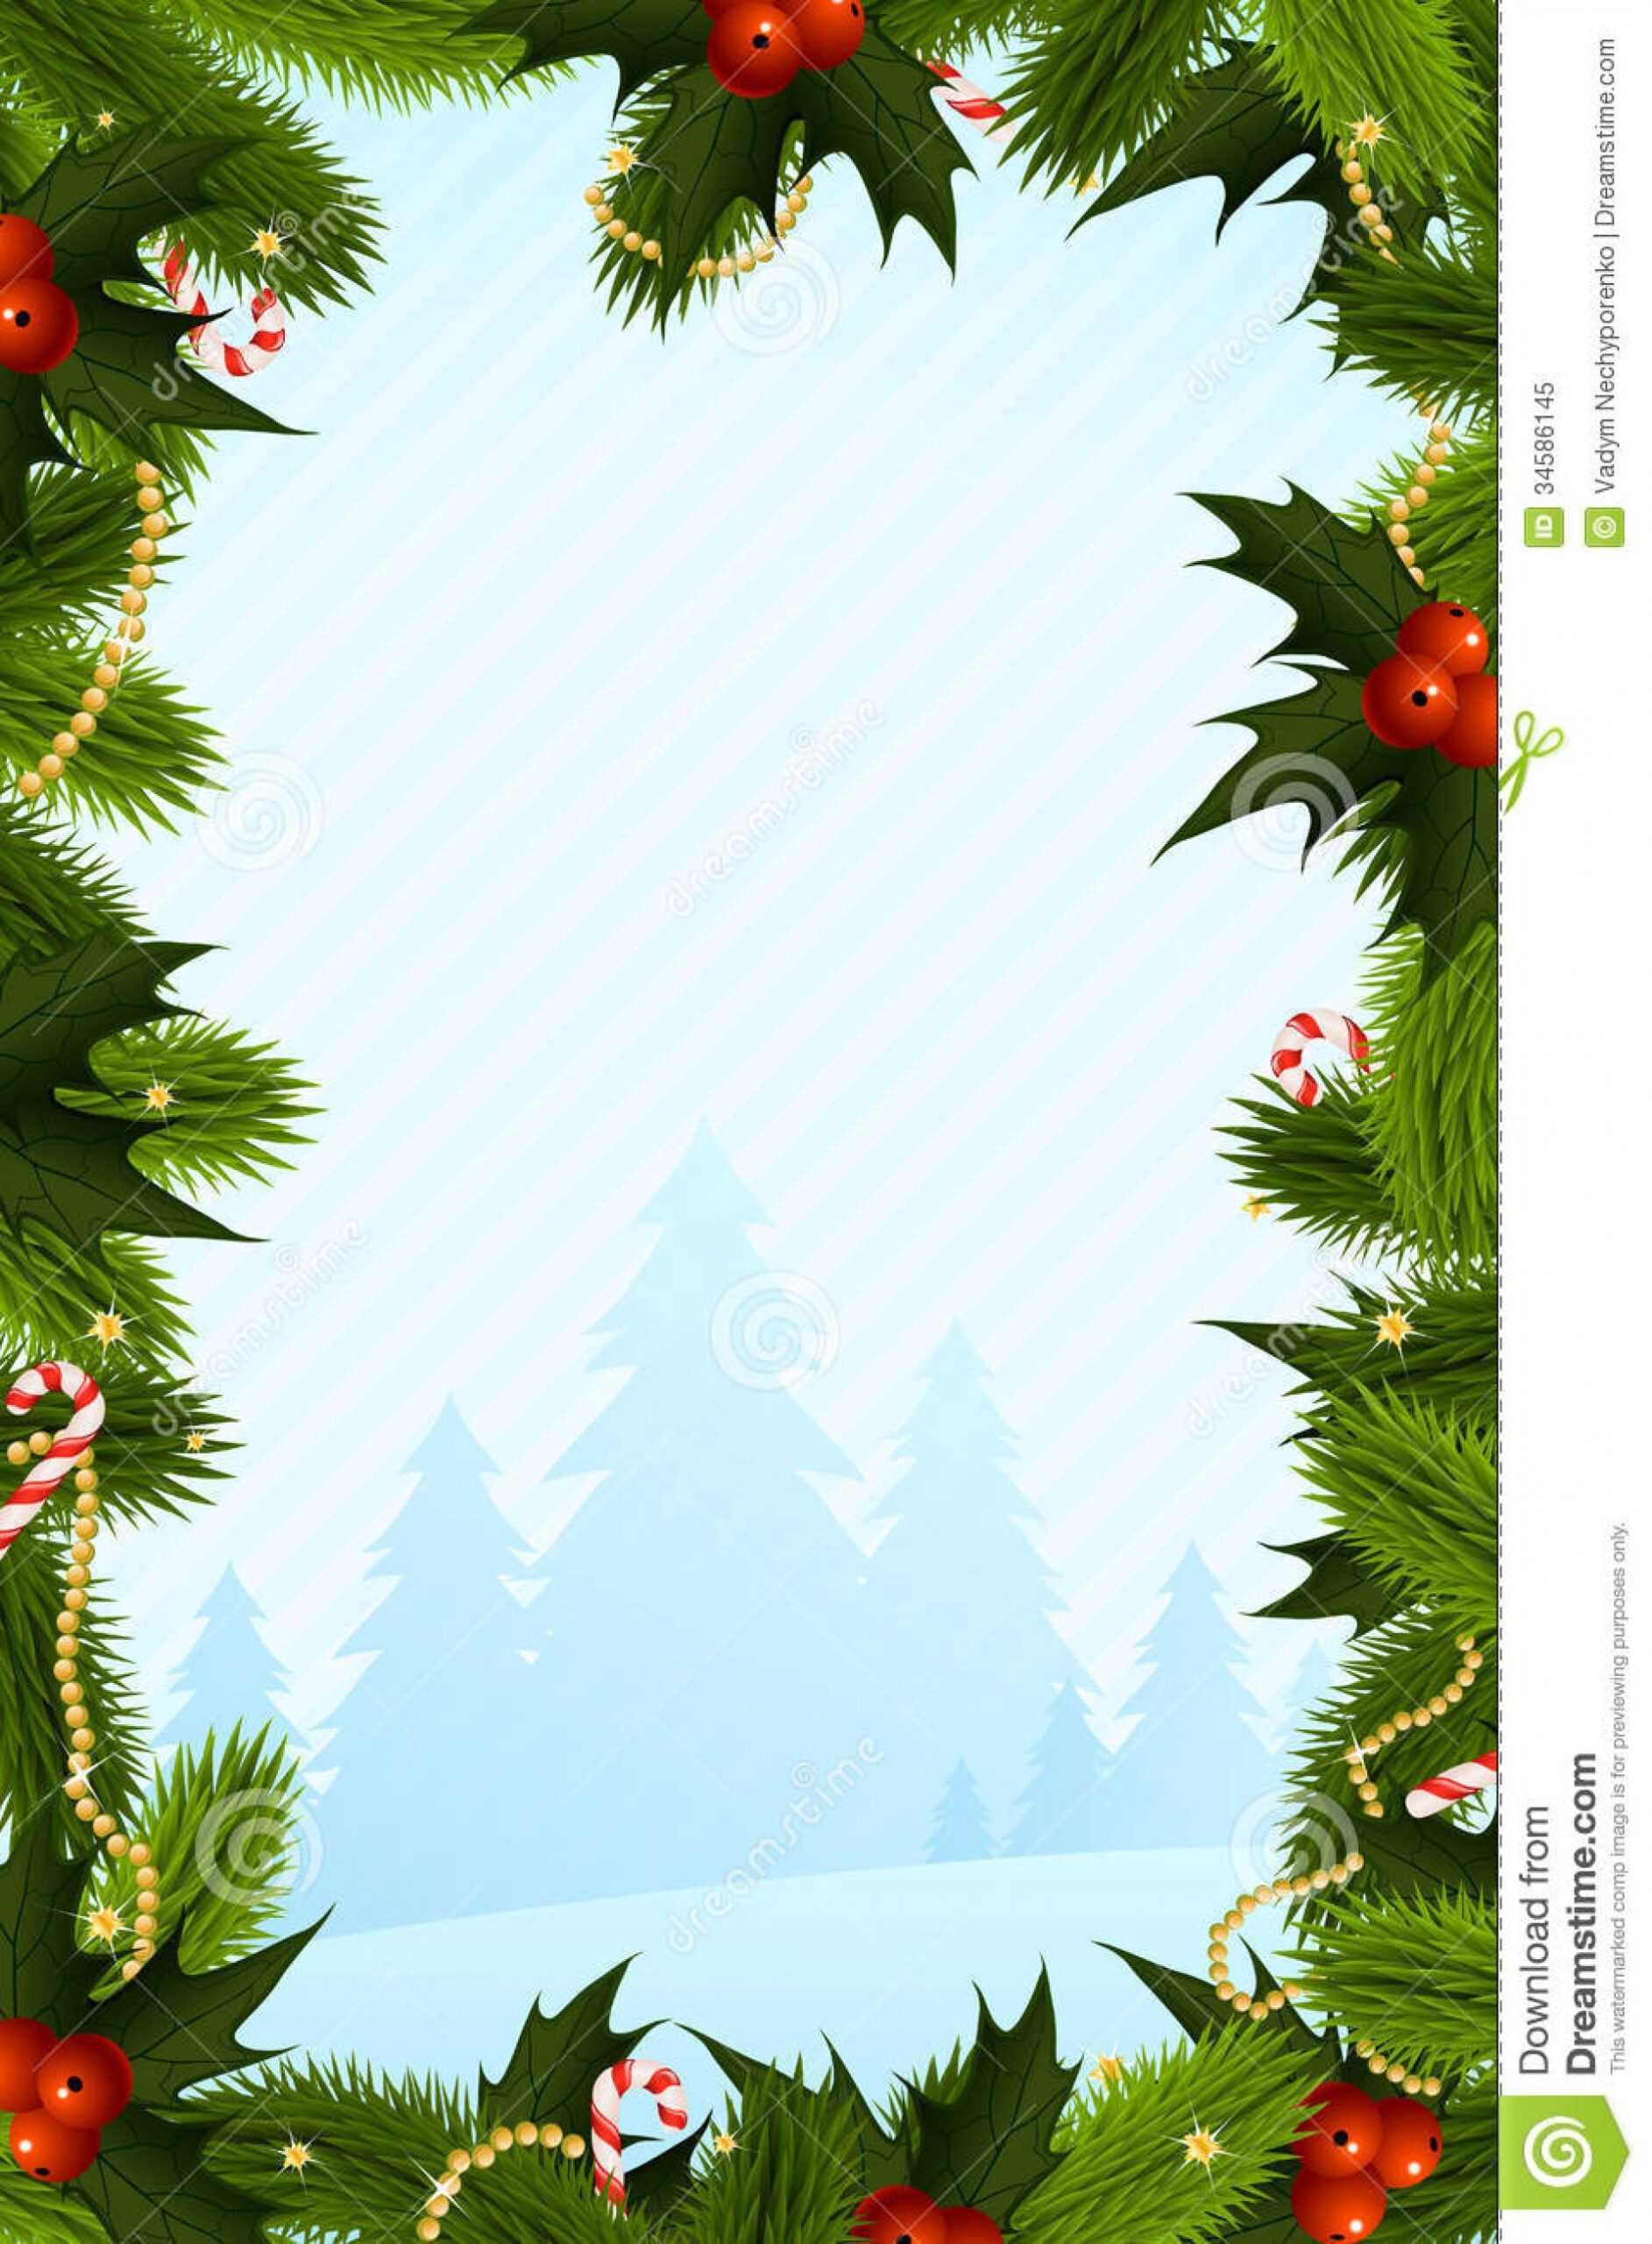 045 Christmas Photo Card Templates Template Best Ideas Free Regarding Christmas Photo Cards Templates Free Downloads